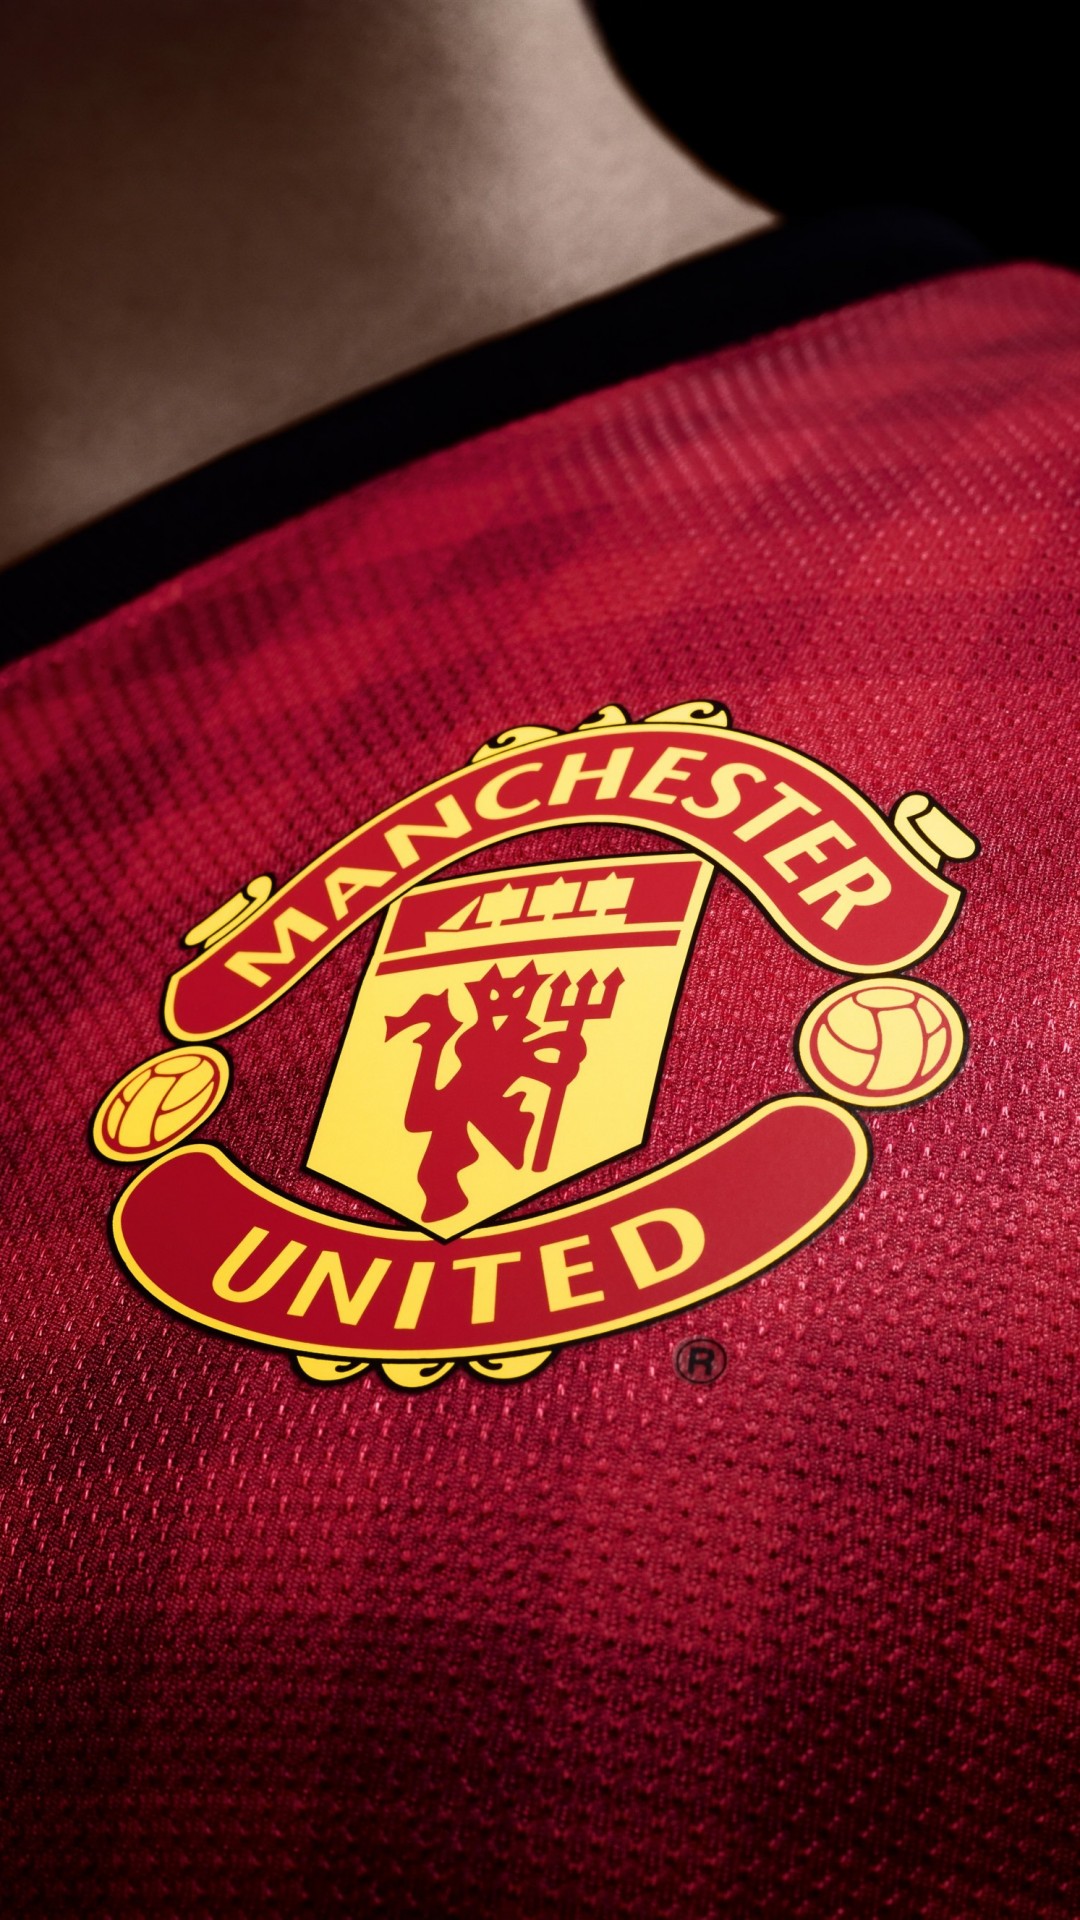 Manchester United Logo Shirt Wallpaper for SONY Xperia Z1